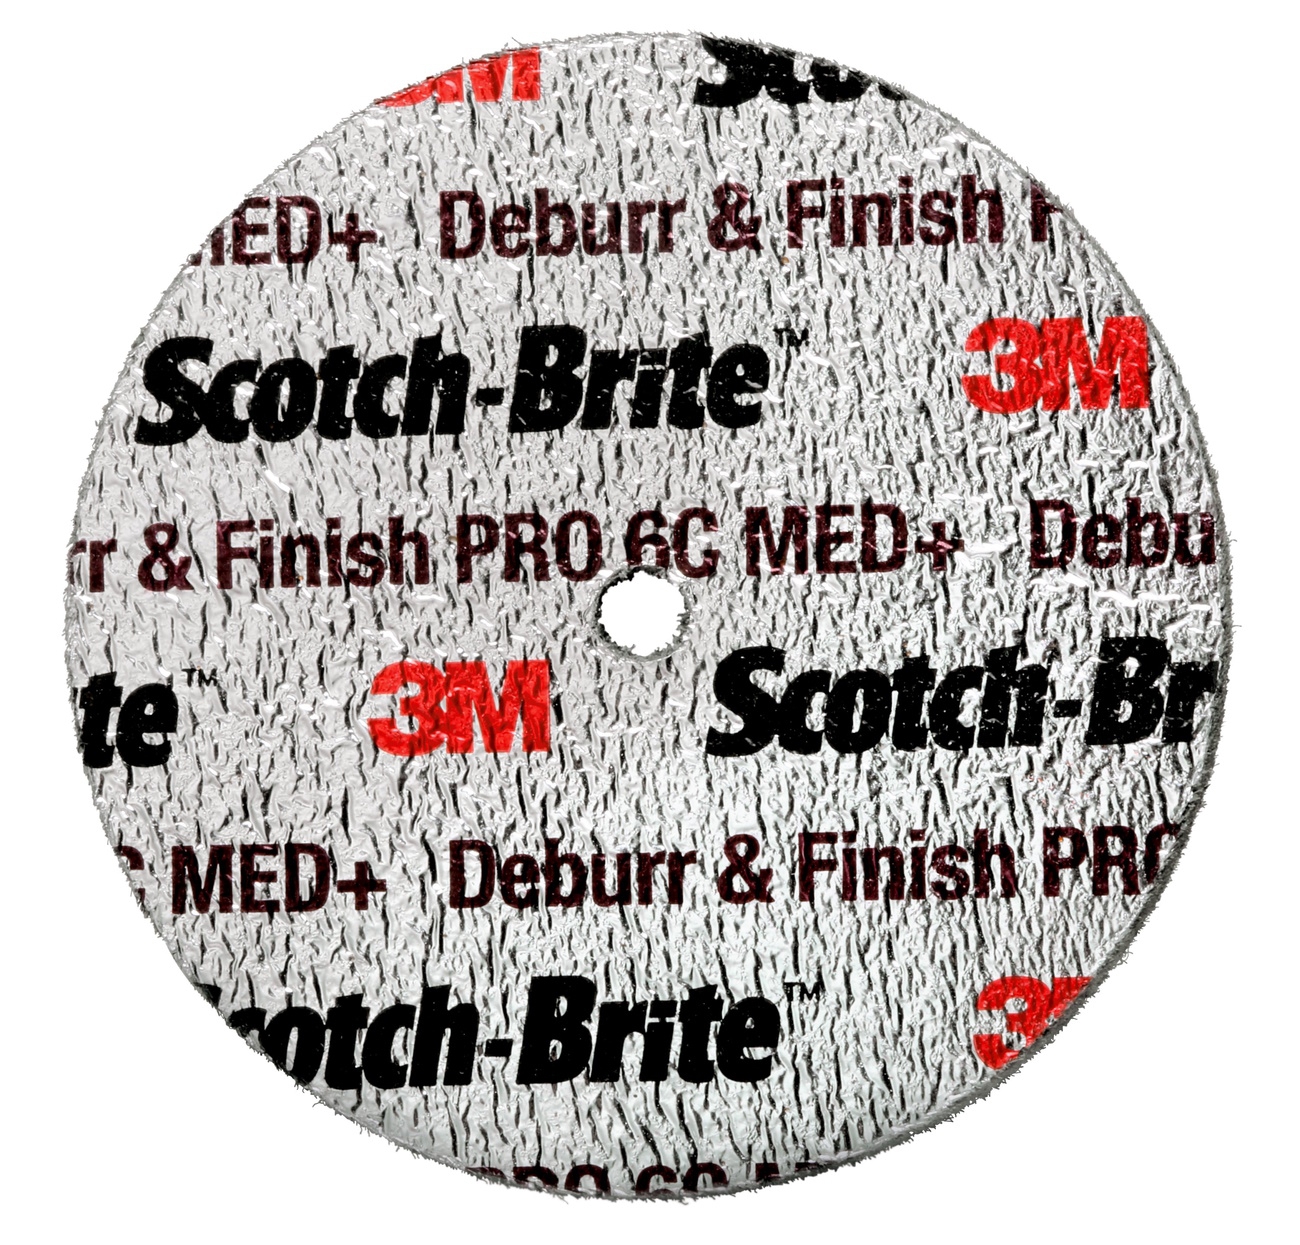  3M Scotch-Brite Deburr and Finish PRO Compact Disc DP-UW, 152 mm x 6,35 mm x 25,4 mm, 6C Med+, 8 WL